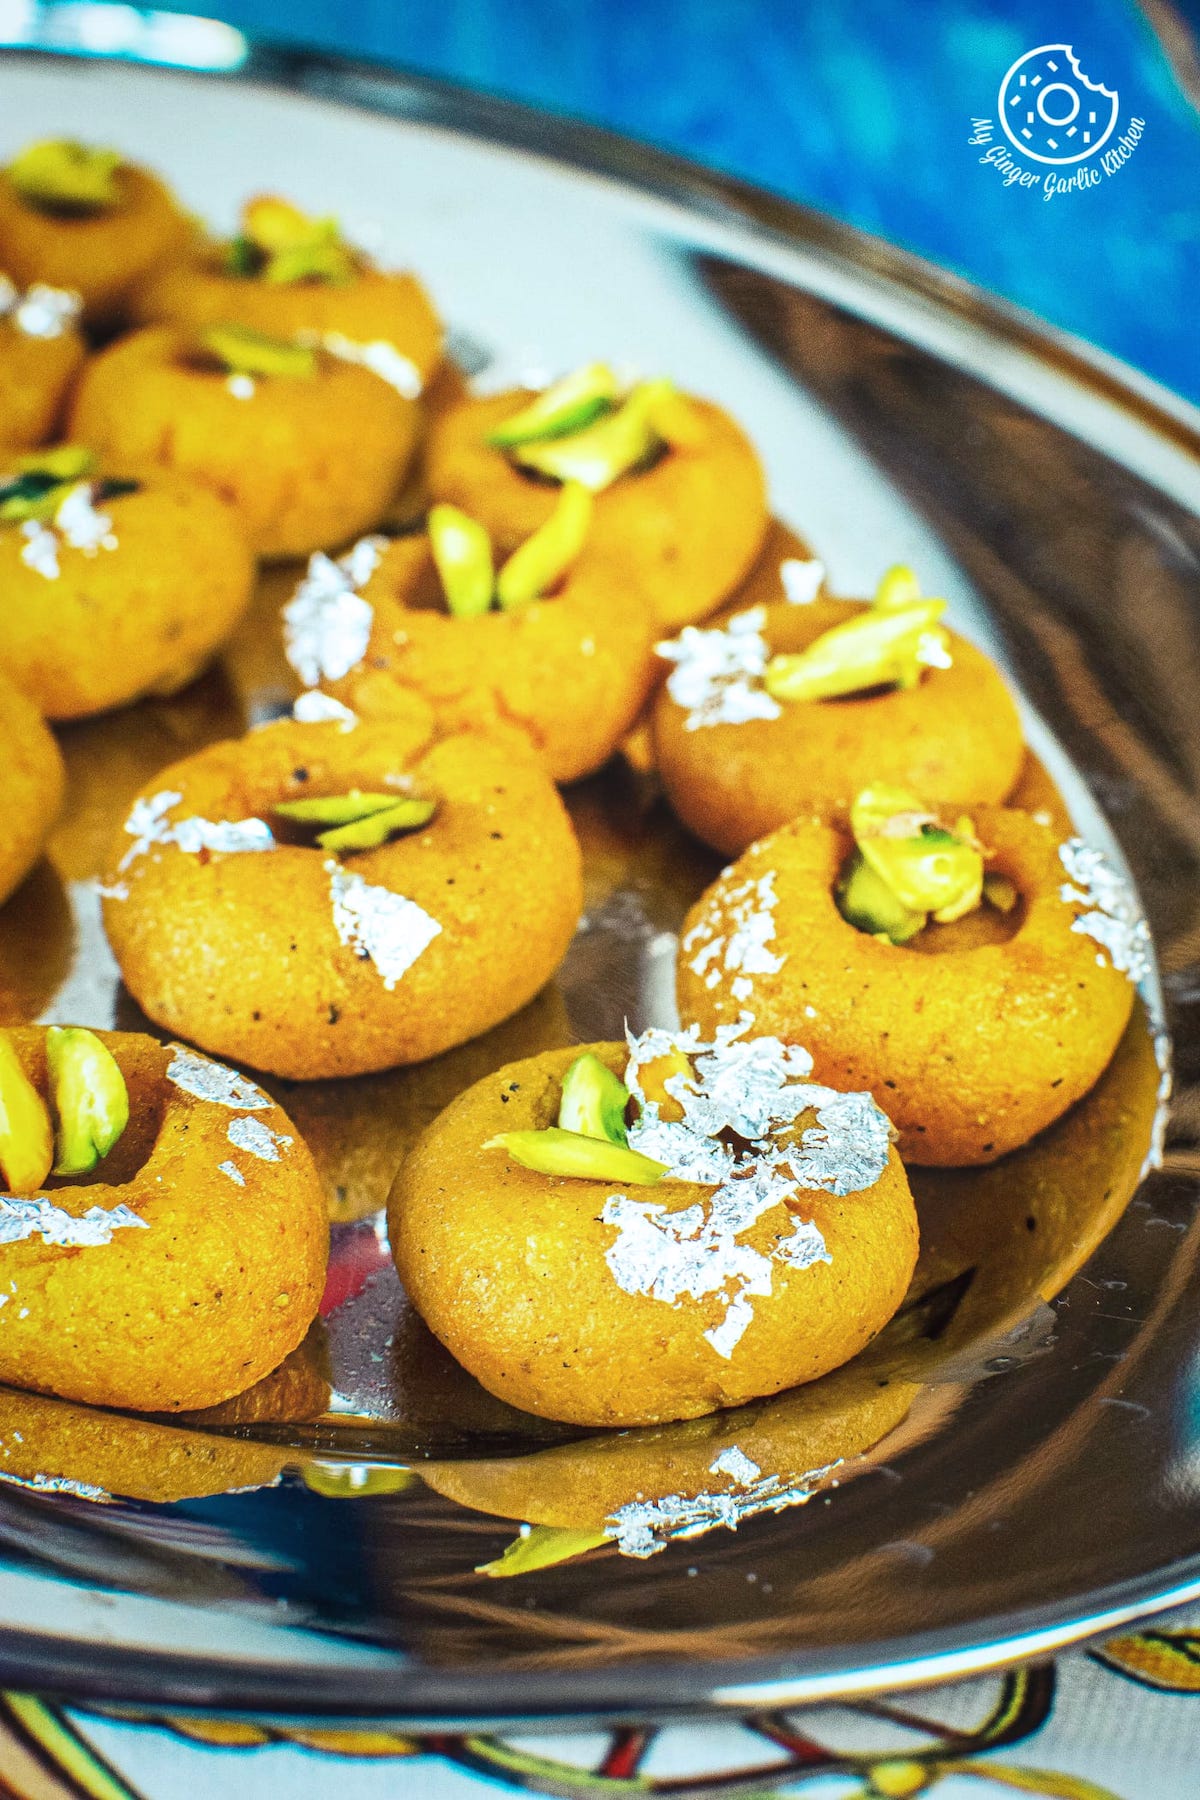 mango peda garnished with edible sliver leaves and pistachios